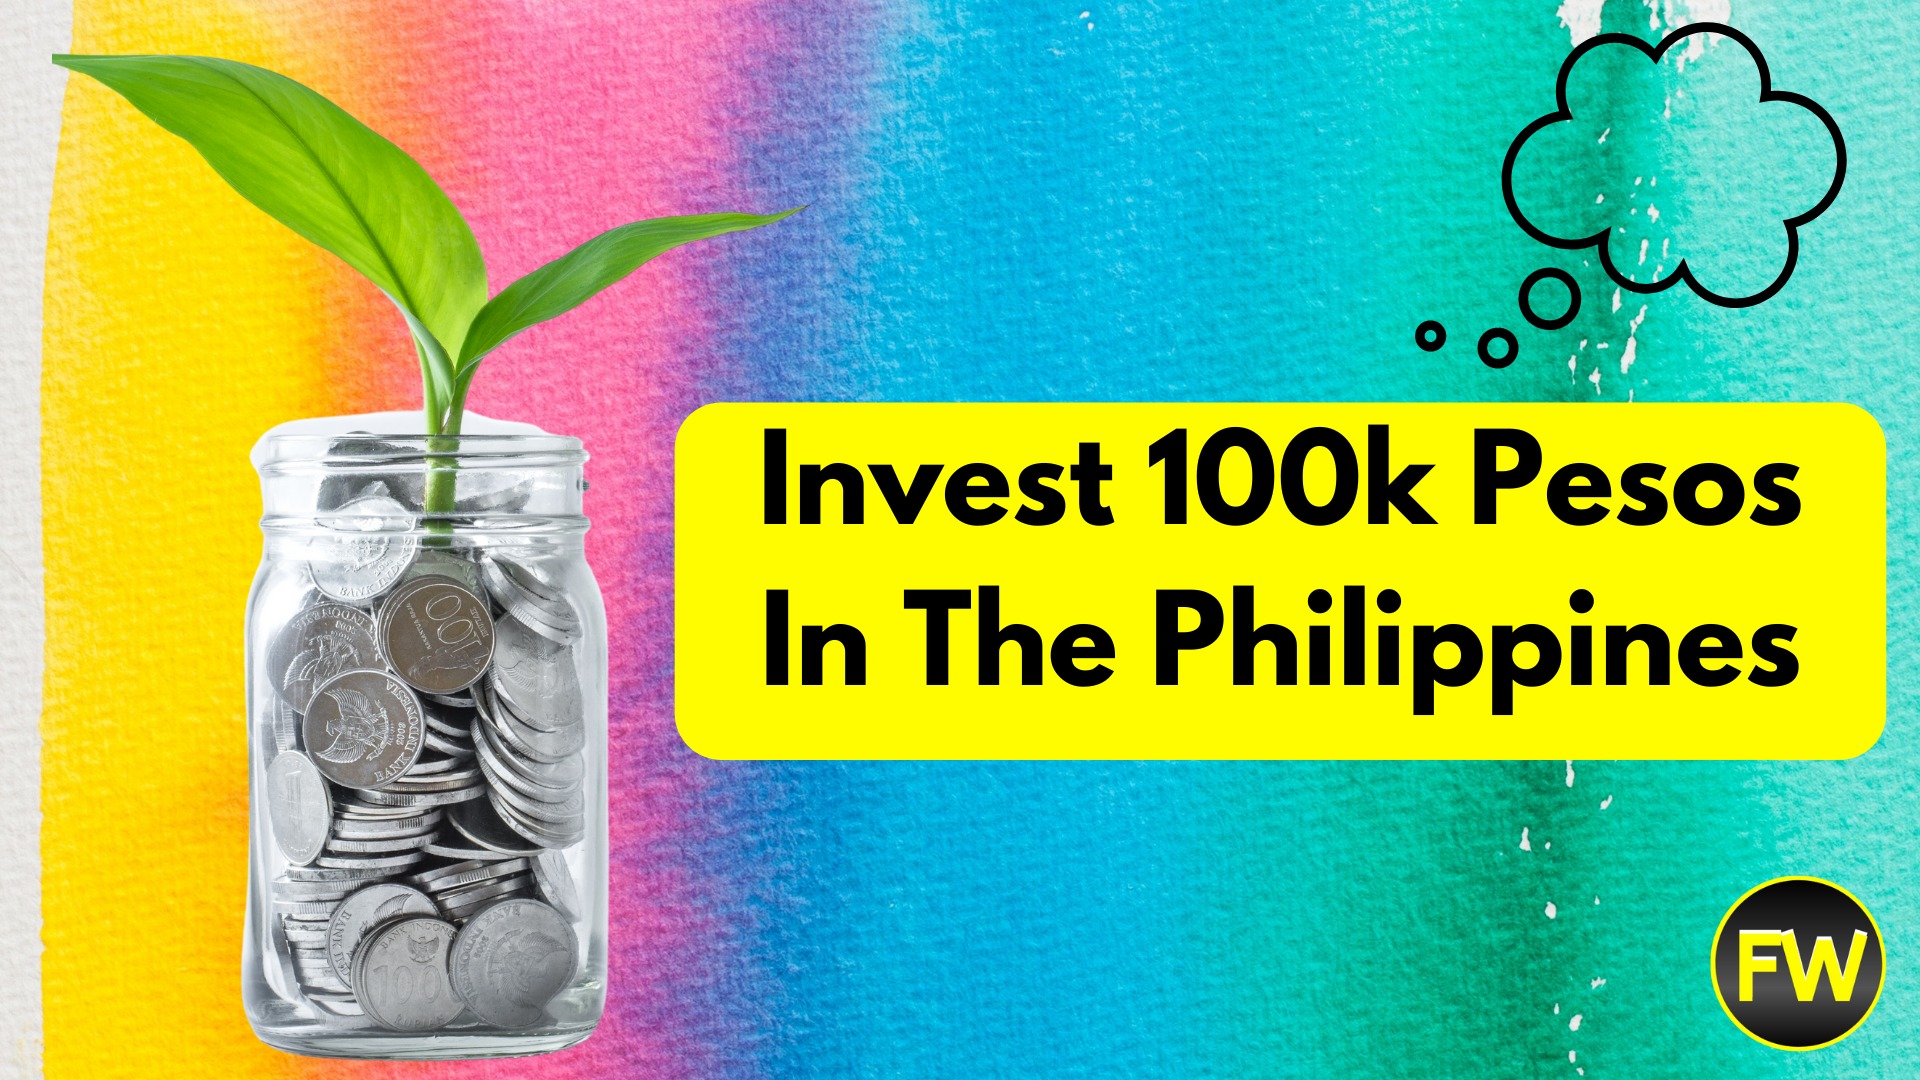 Investing your money philippines convert forex chart online russian